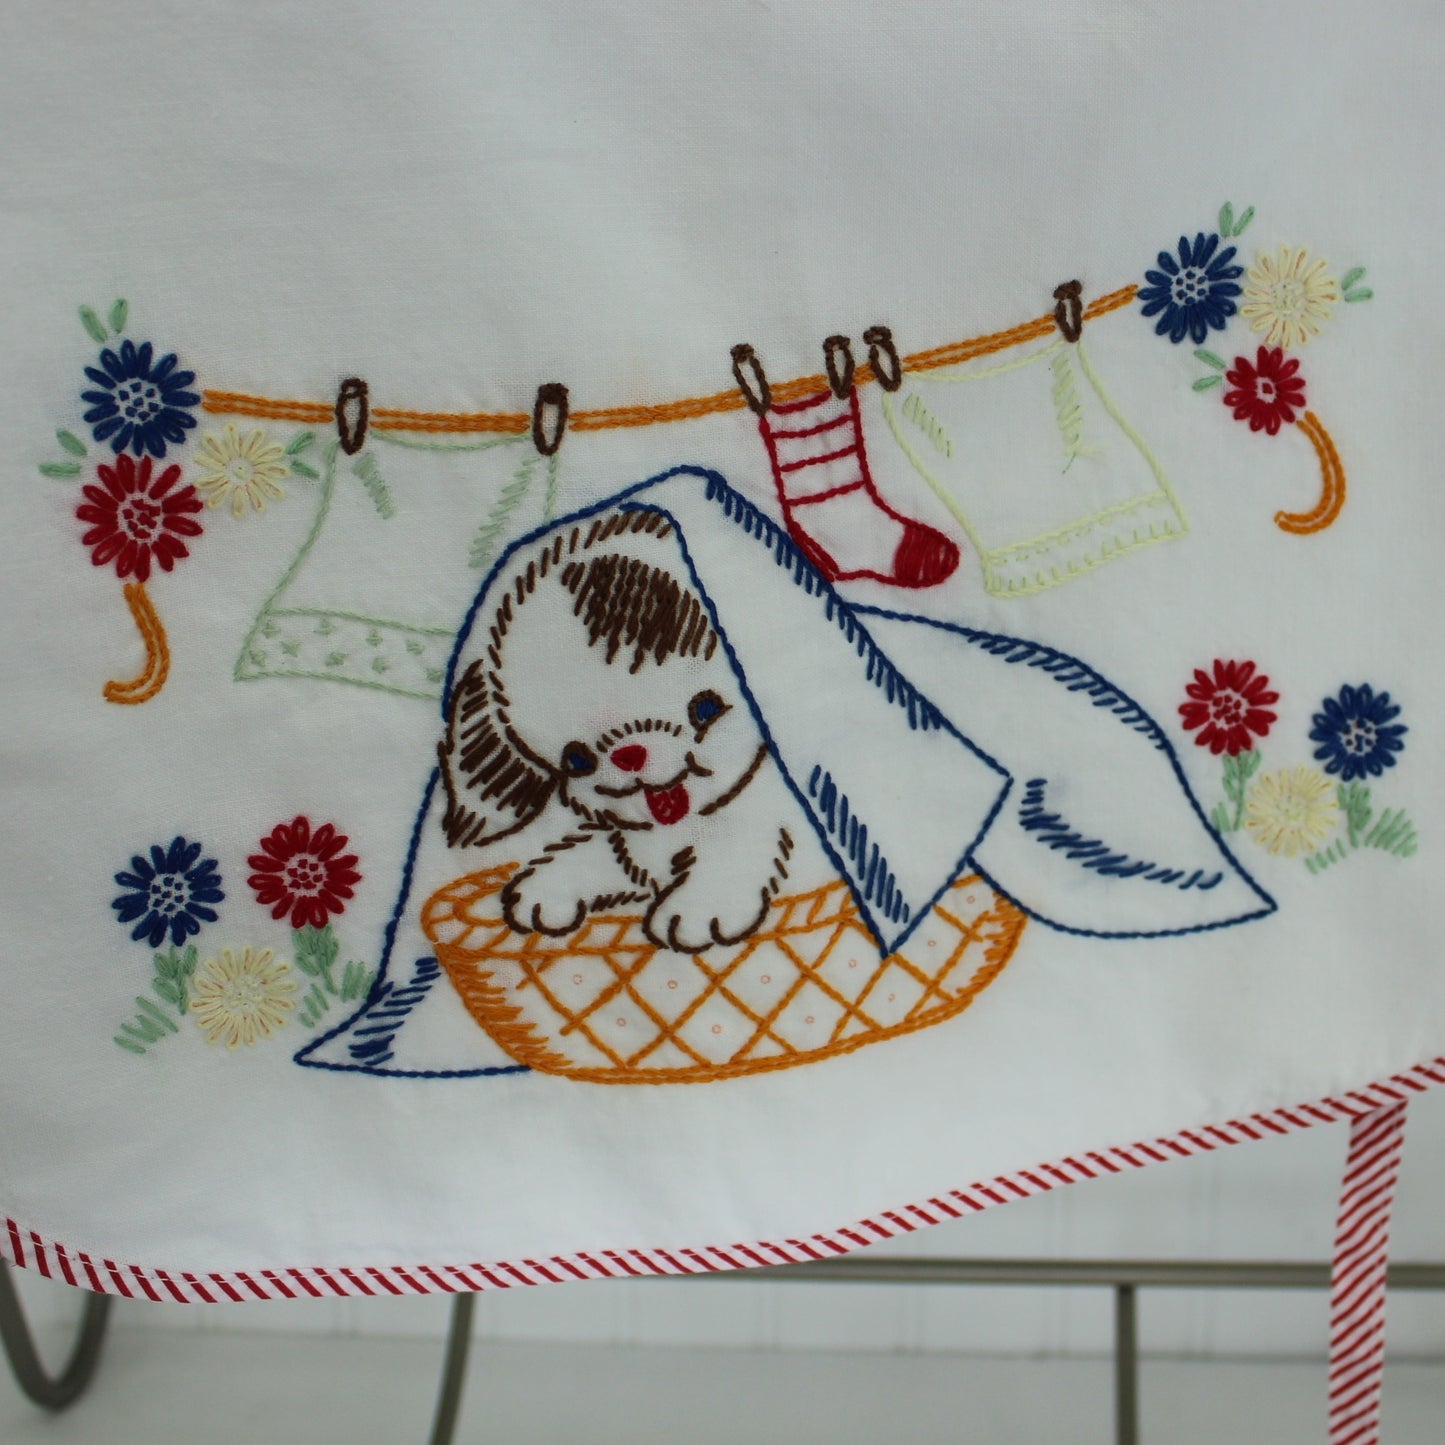 Clothes Pin Half Apron Embroidered Puppy Flowers Large Pockets Candy Stripe Edge clothes on line embroidered